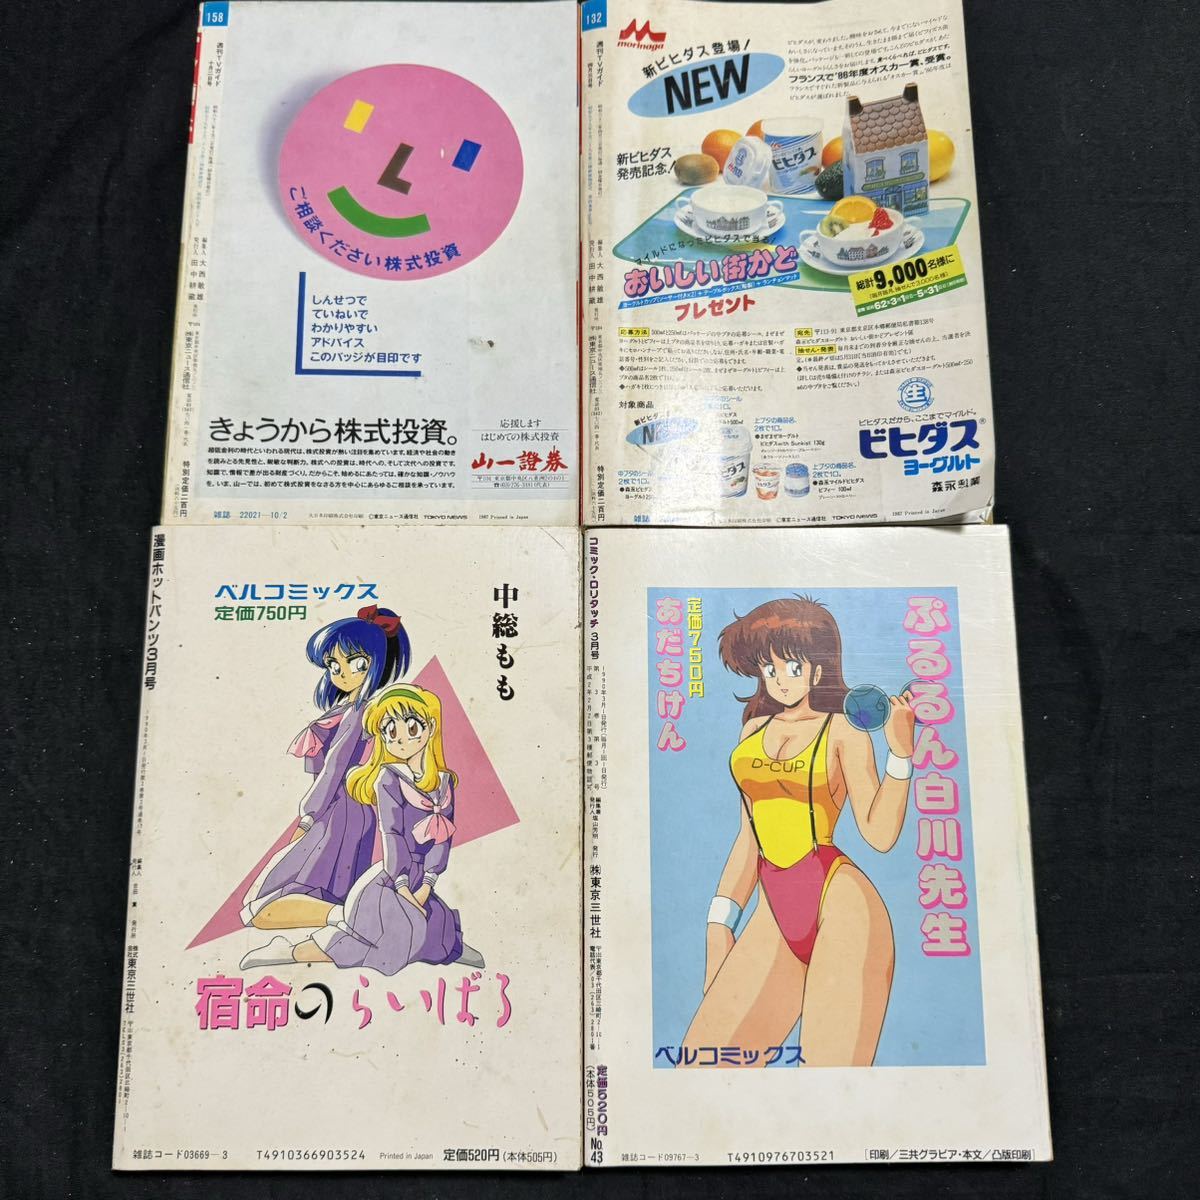 roli Touch hot pants TV guide lady's comics manga 1990 year 3 month number together 